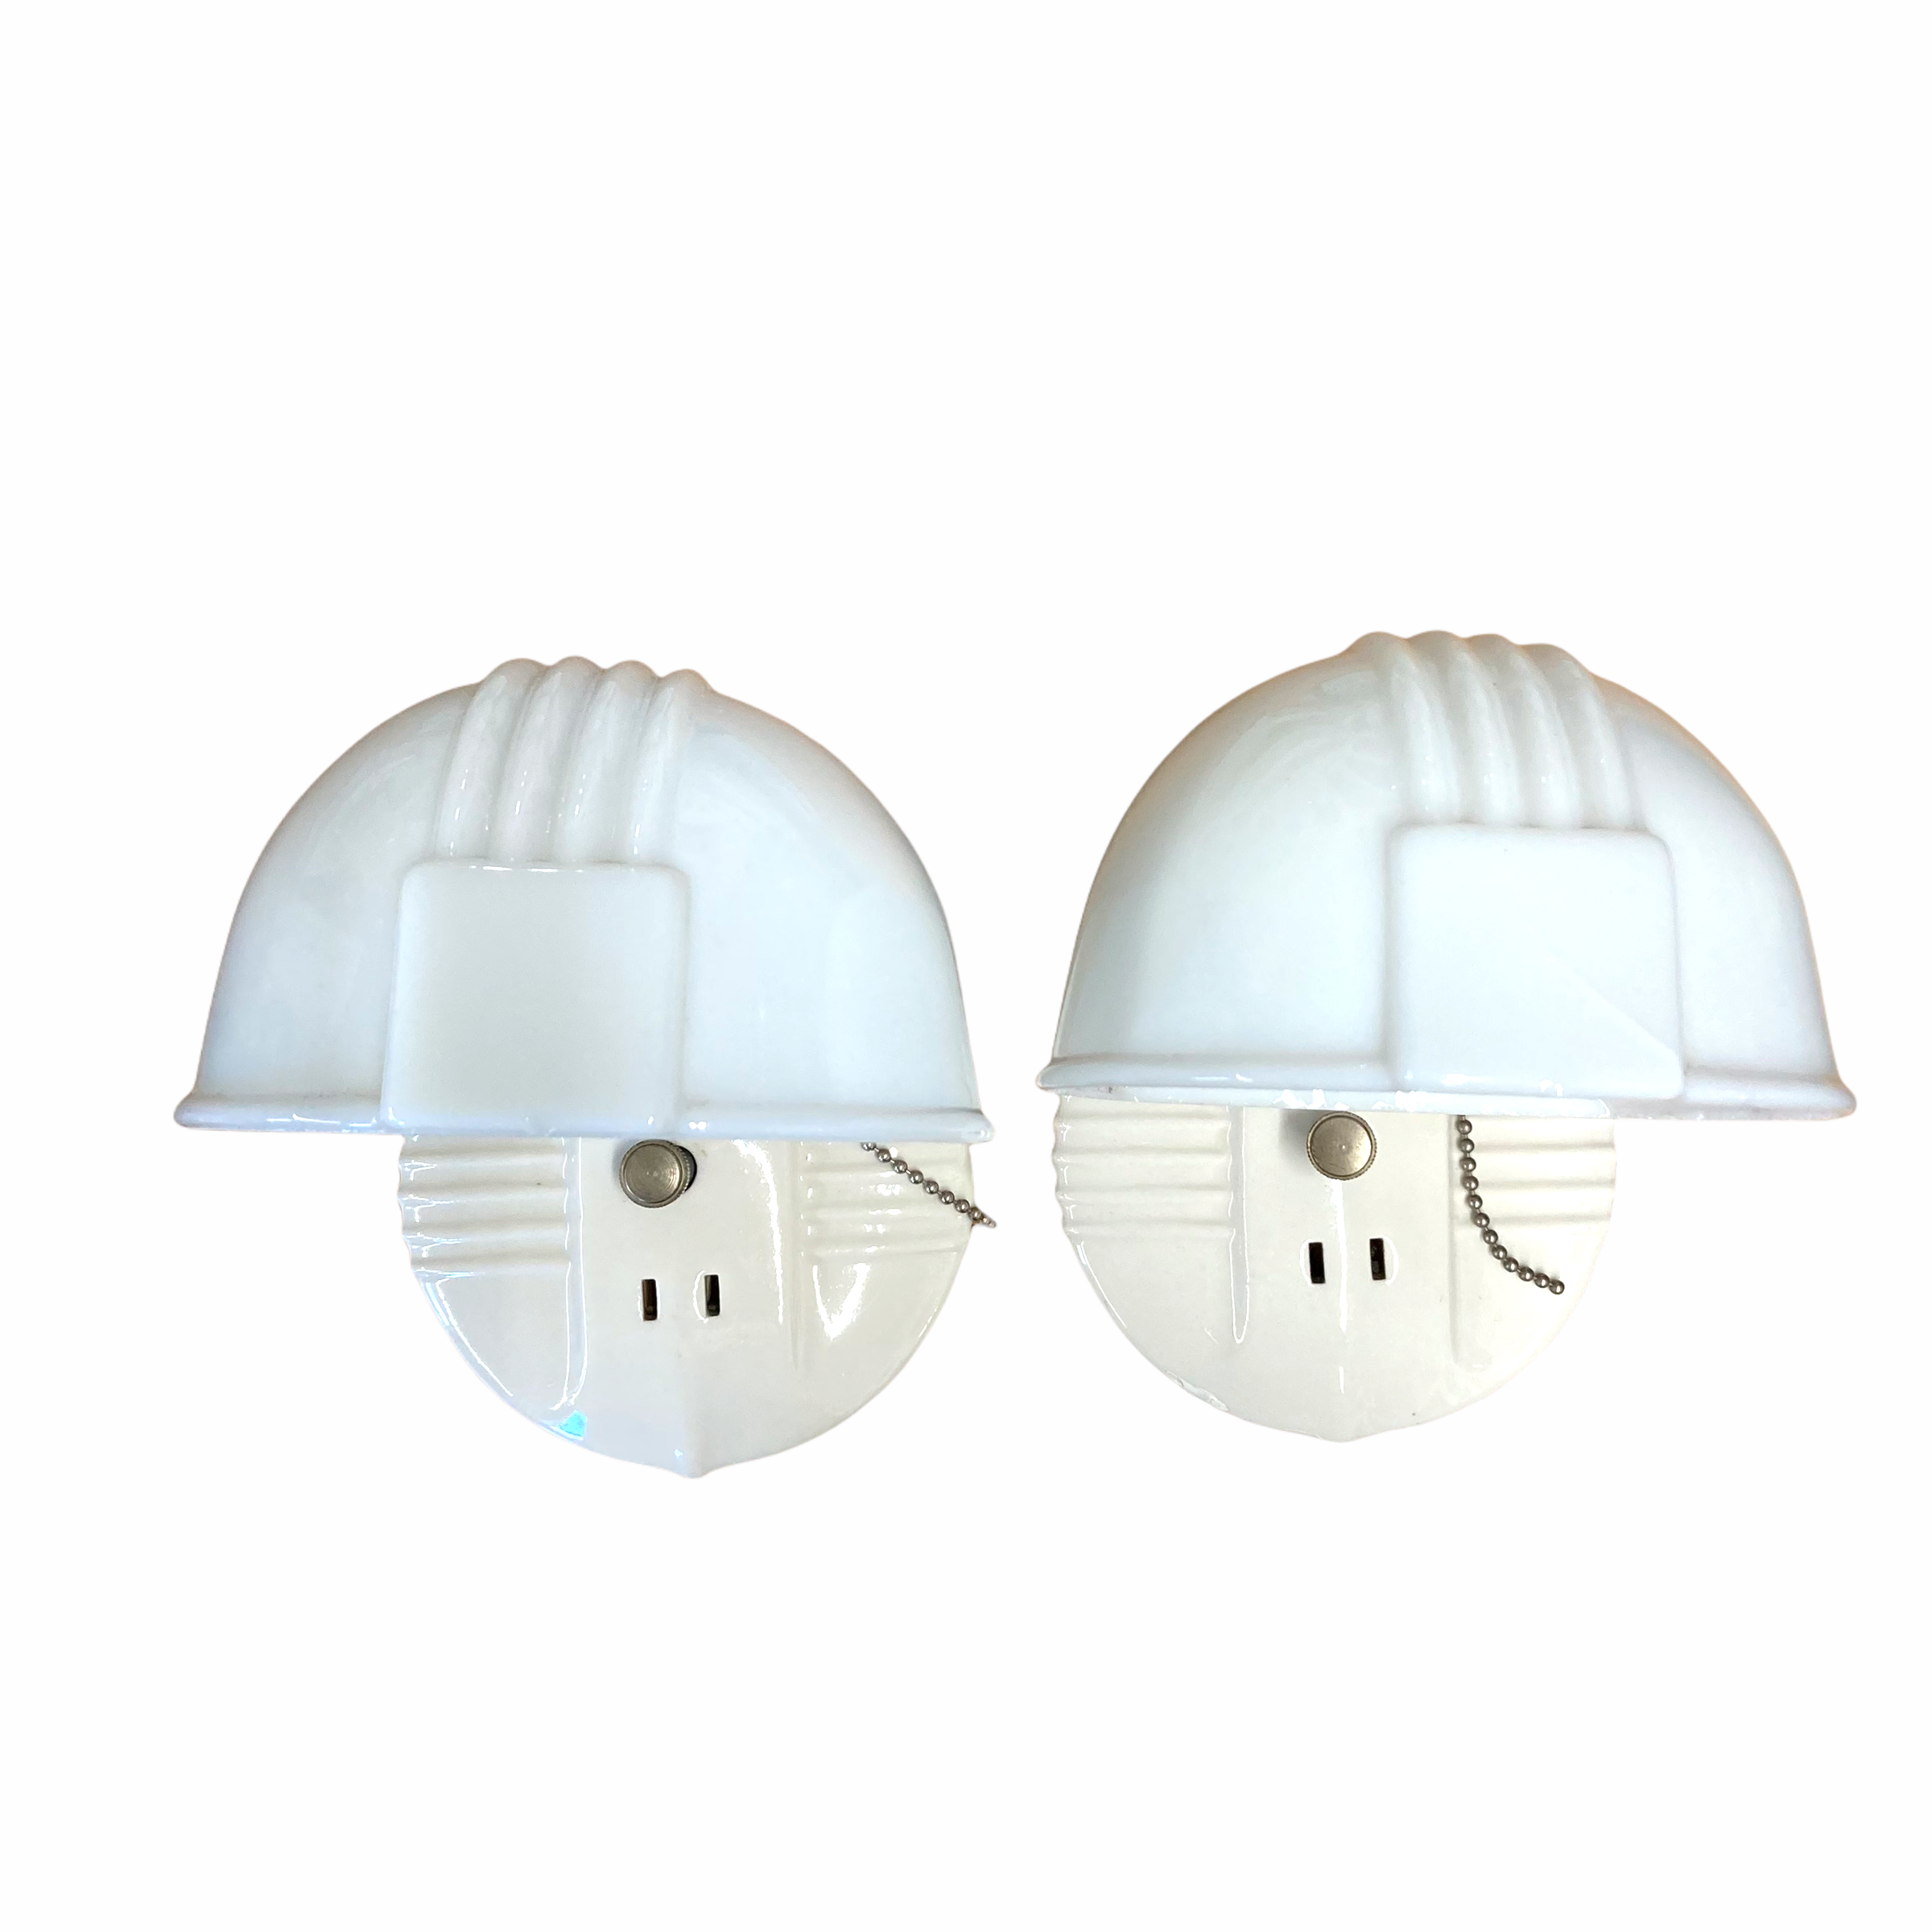 Pair of Antique Porcelain Wall Sconce Light Fixtures with Glass Shades